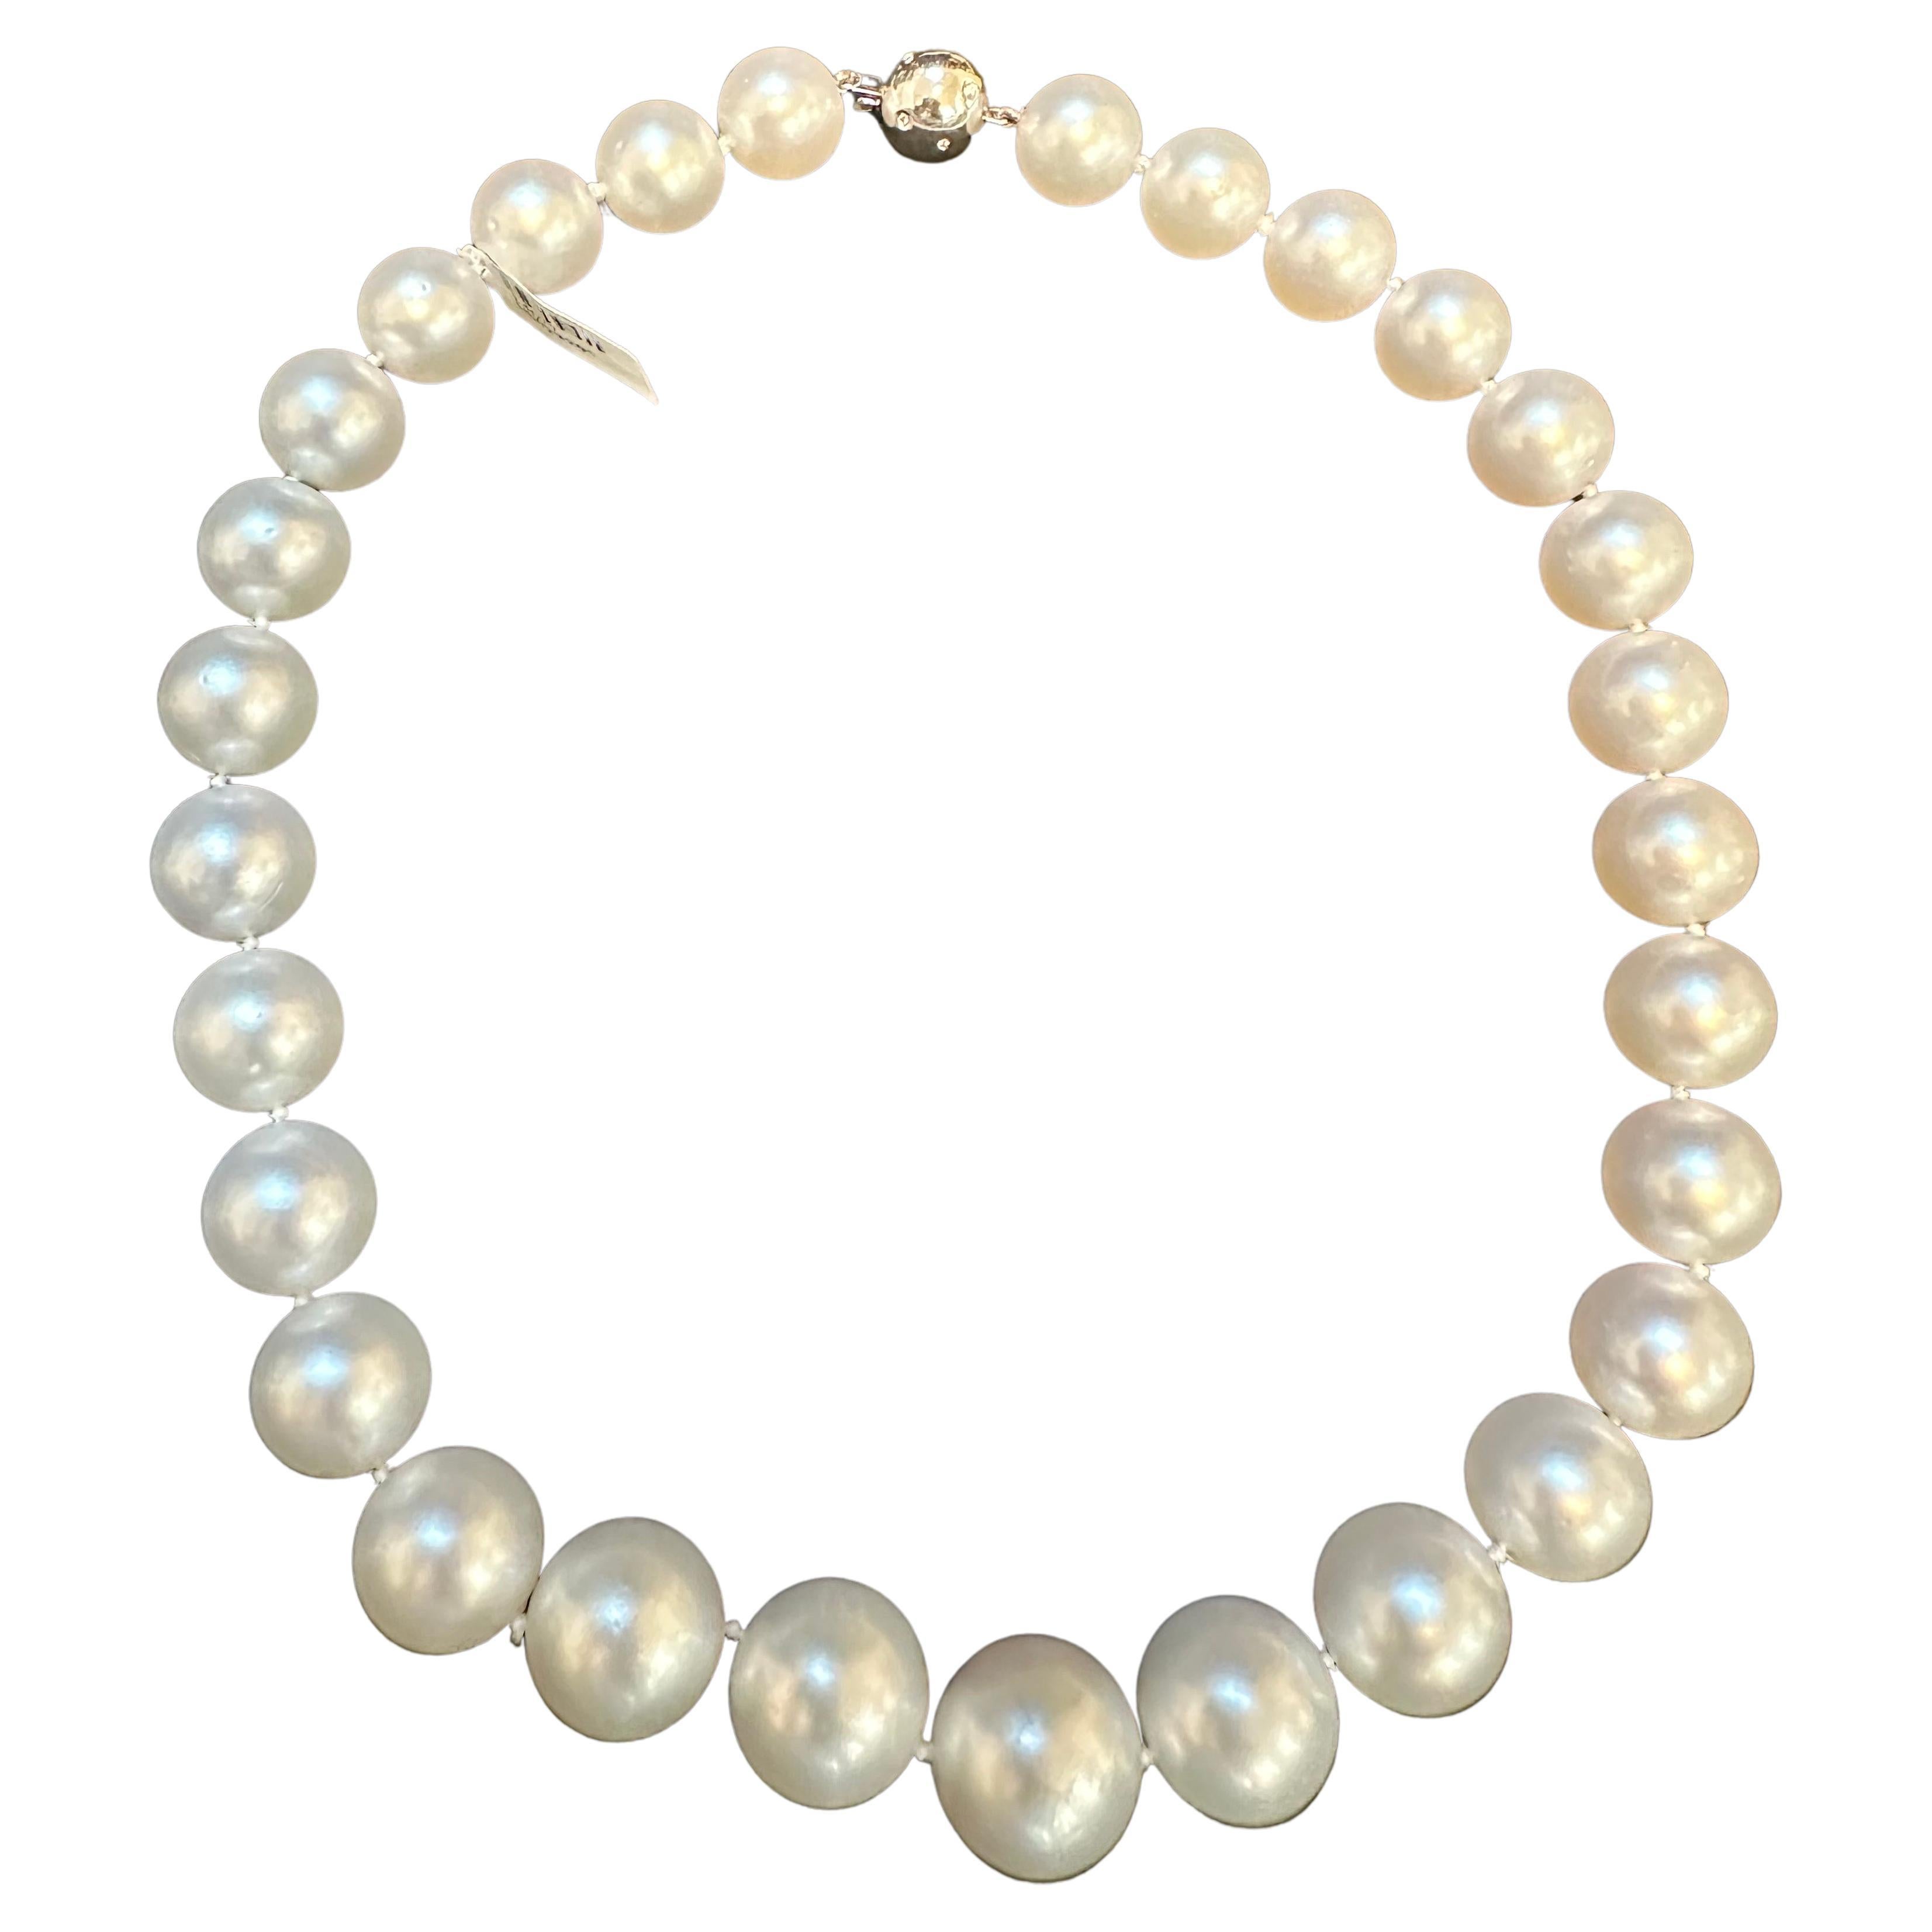 Round Cut 13-16.5mm White South Sea Round Pearl Necklace - AAA Quality, 29 Pieces +Diamond For Sale